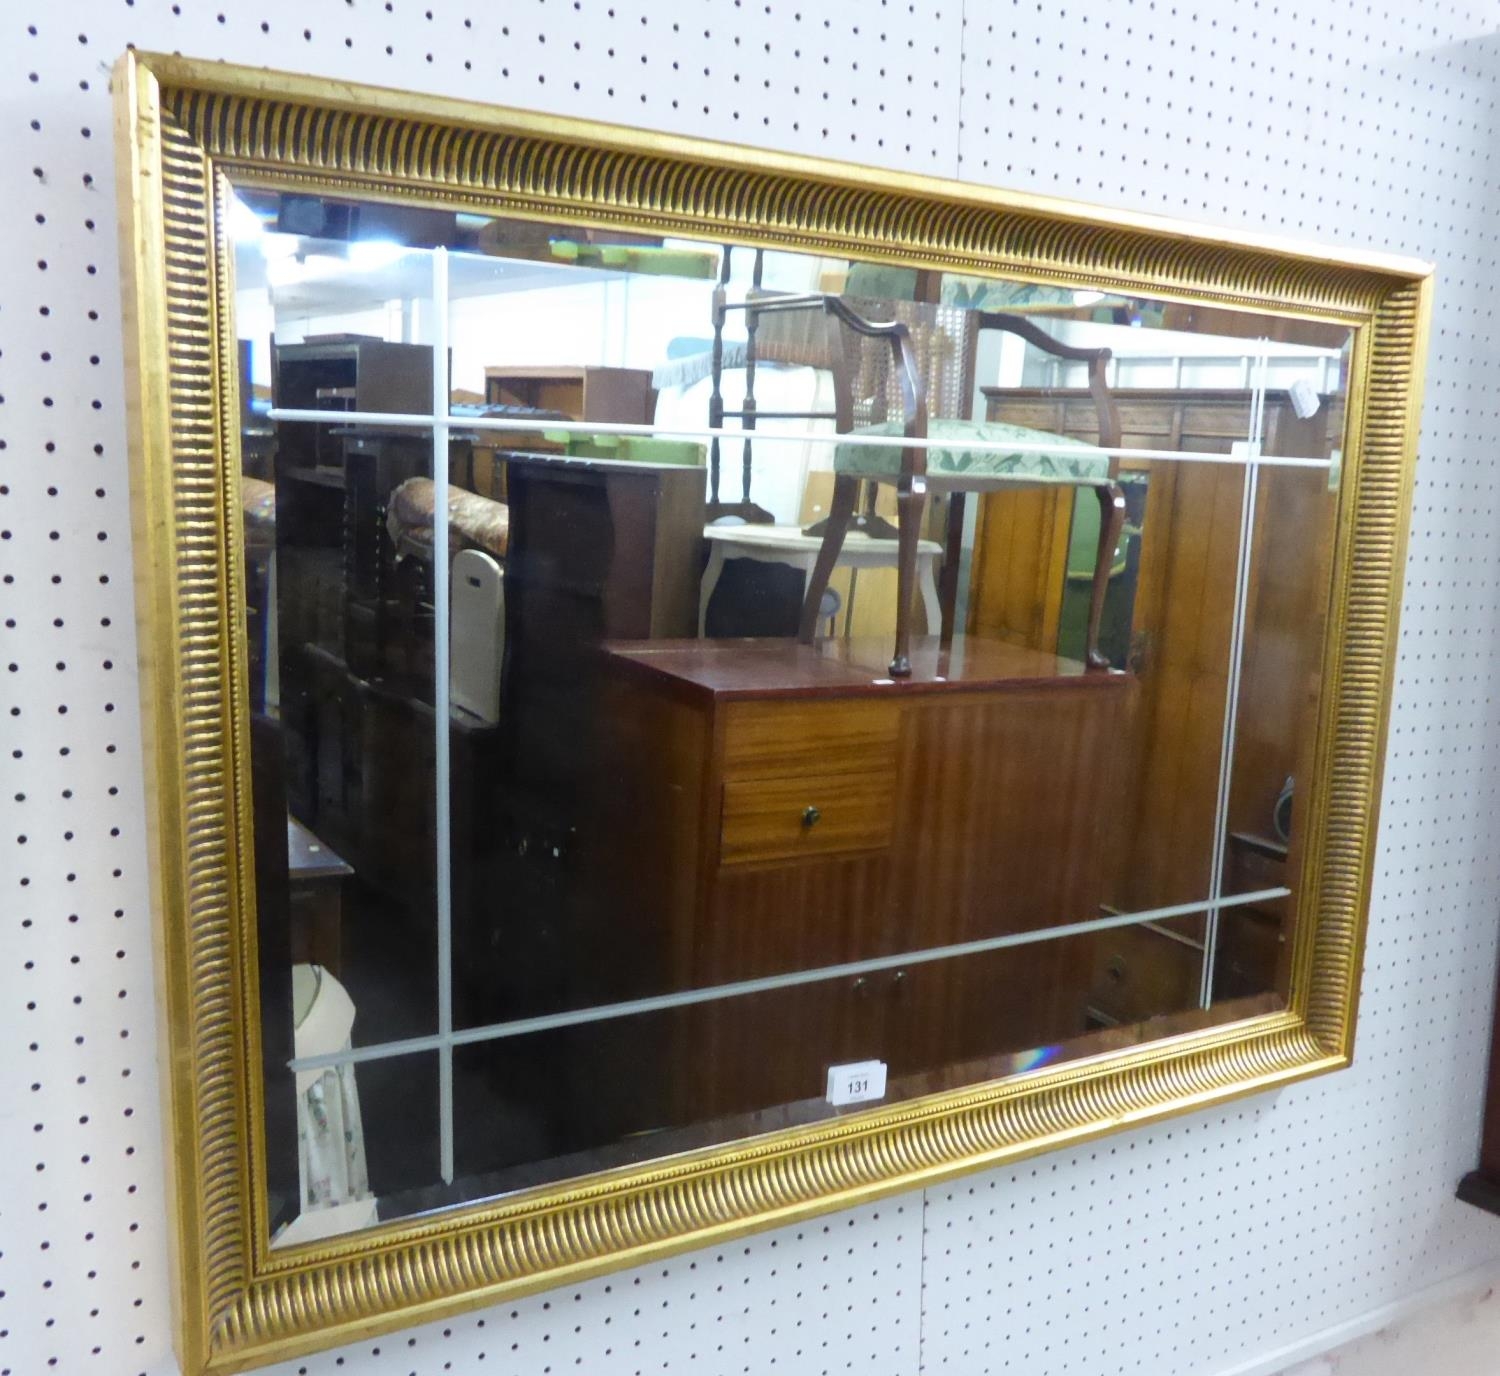 RECTANGULAR BEVELLED EDGE WALL MIRROR, WITH CUT-LINE DECORATION, IN FLUTED CAVETTO GILT FRAME, 1'11"